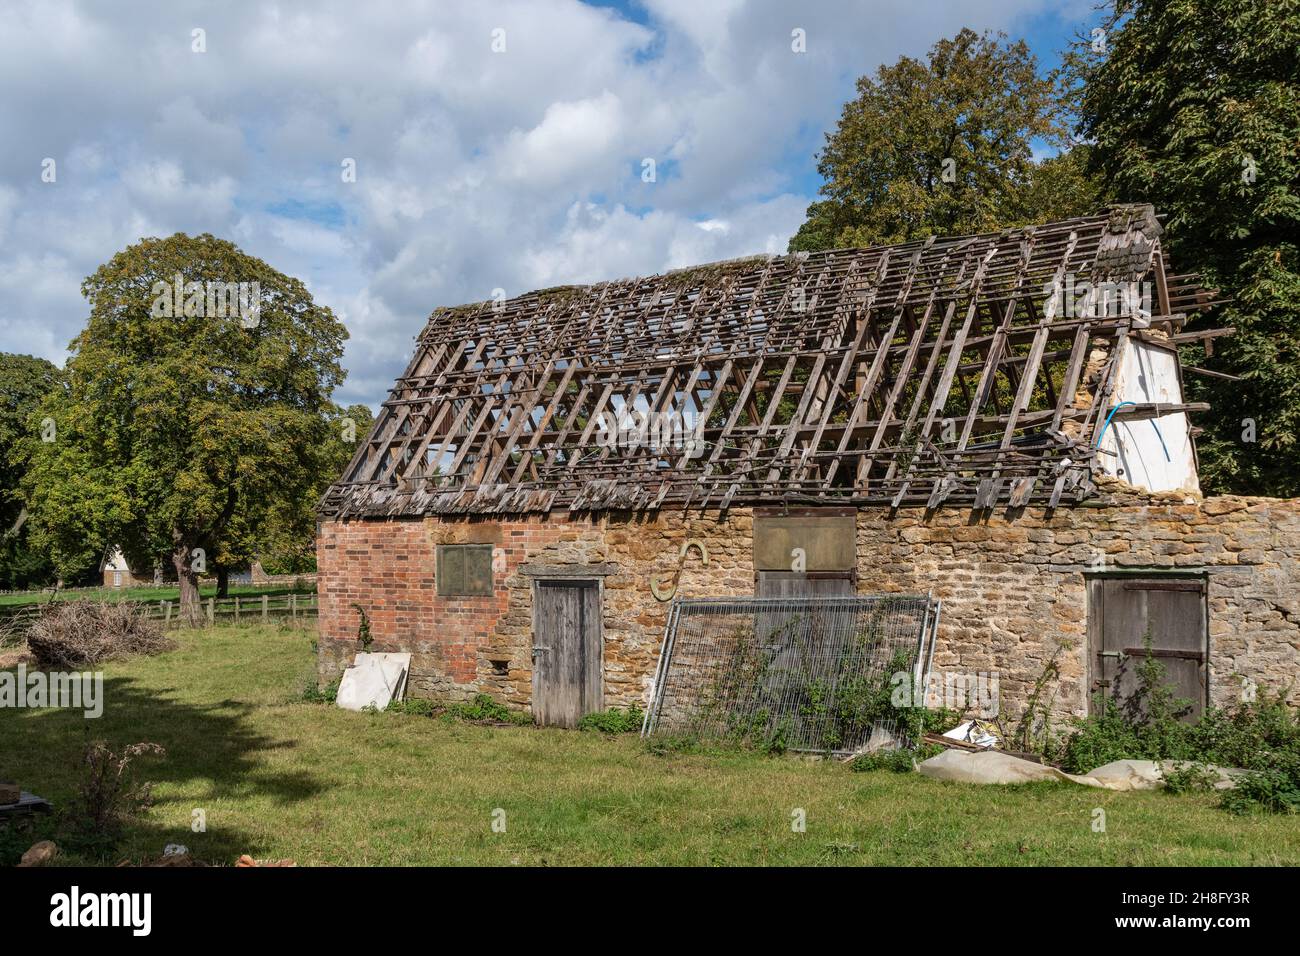 Dilapidated old barn, missing its roof tiles, in the village of Ashby St Ledgers, Northamptonshire, UK Stock Photo